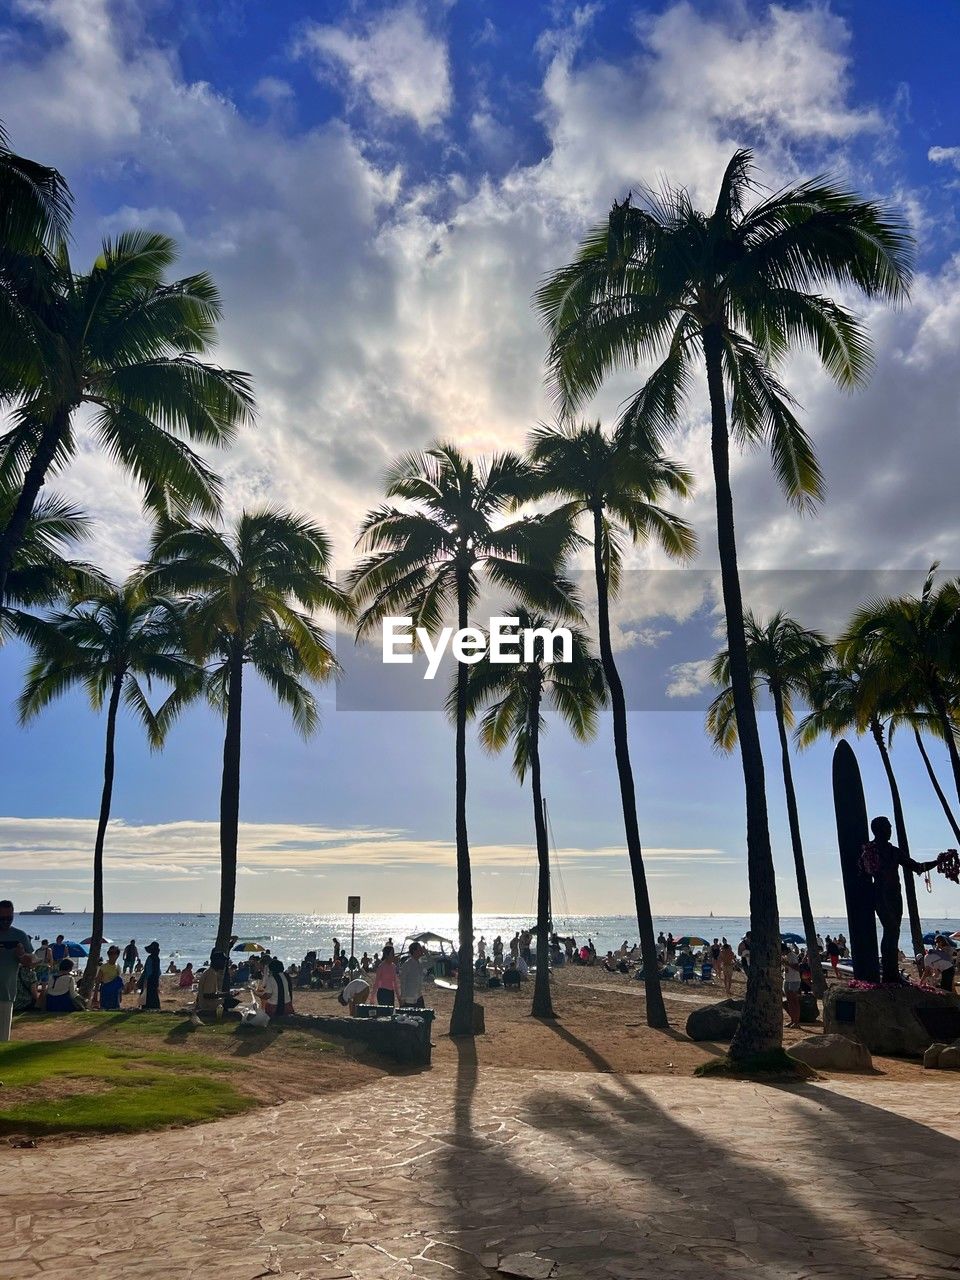 palm tree, tropical climate, sky, tree, sea, water, beach, land, nature, cloud, plant, vacation, coast, ocean, trip, body of water, holiday, beauty in nature, travel destinations, coconut palm tree, scenics - nature, shore, travel, sand, tranquility, tourism, sunlight, tropics, outdoors, tropical tree, tranquil scene, idyllic, environment, bay, group of people, horizon over water, relaxation, tourist, island, horizon, blue, leisure activity, day, walkway, summer, transportation, sunset, landscape, coastline, lifestyles, shadow, nautical vessel, tourist resort